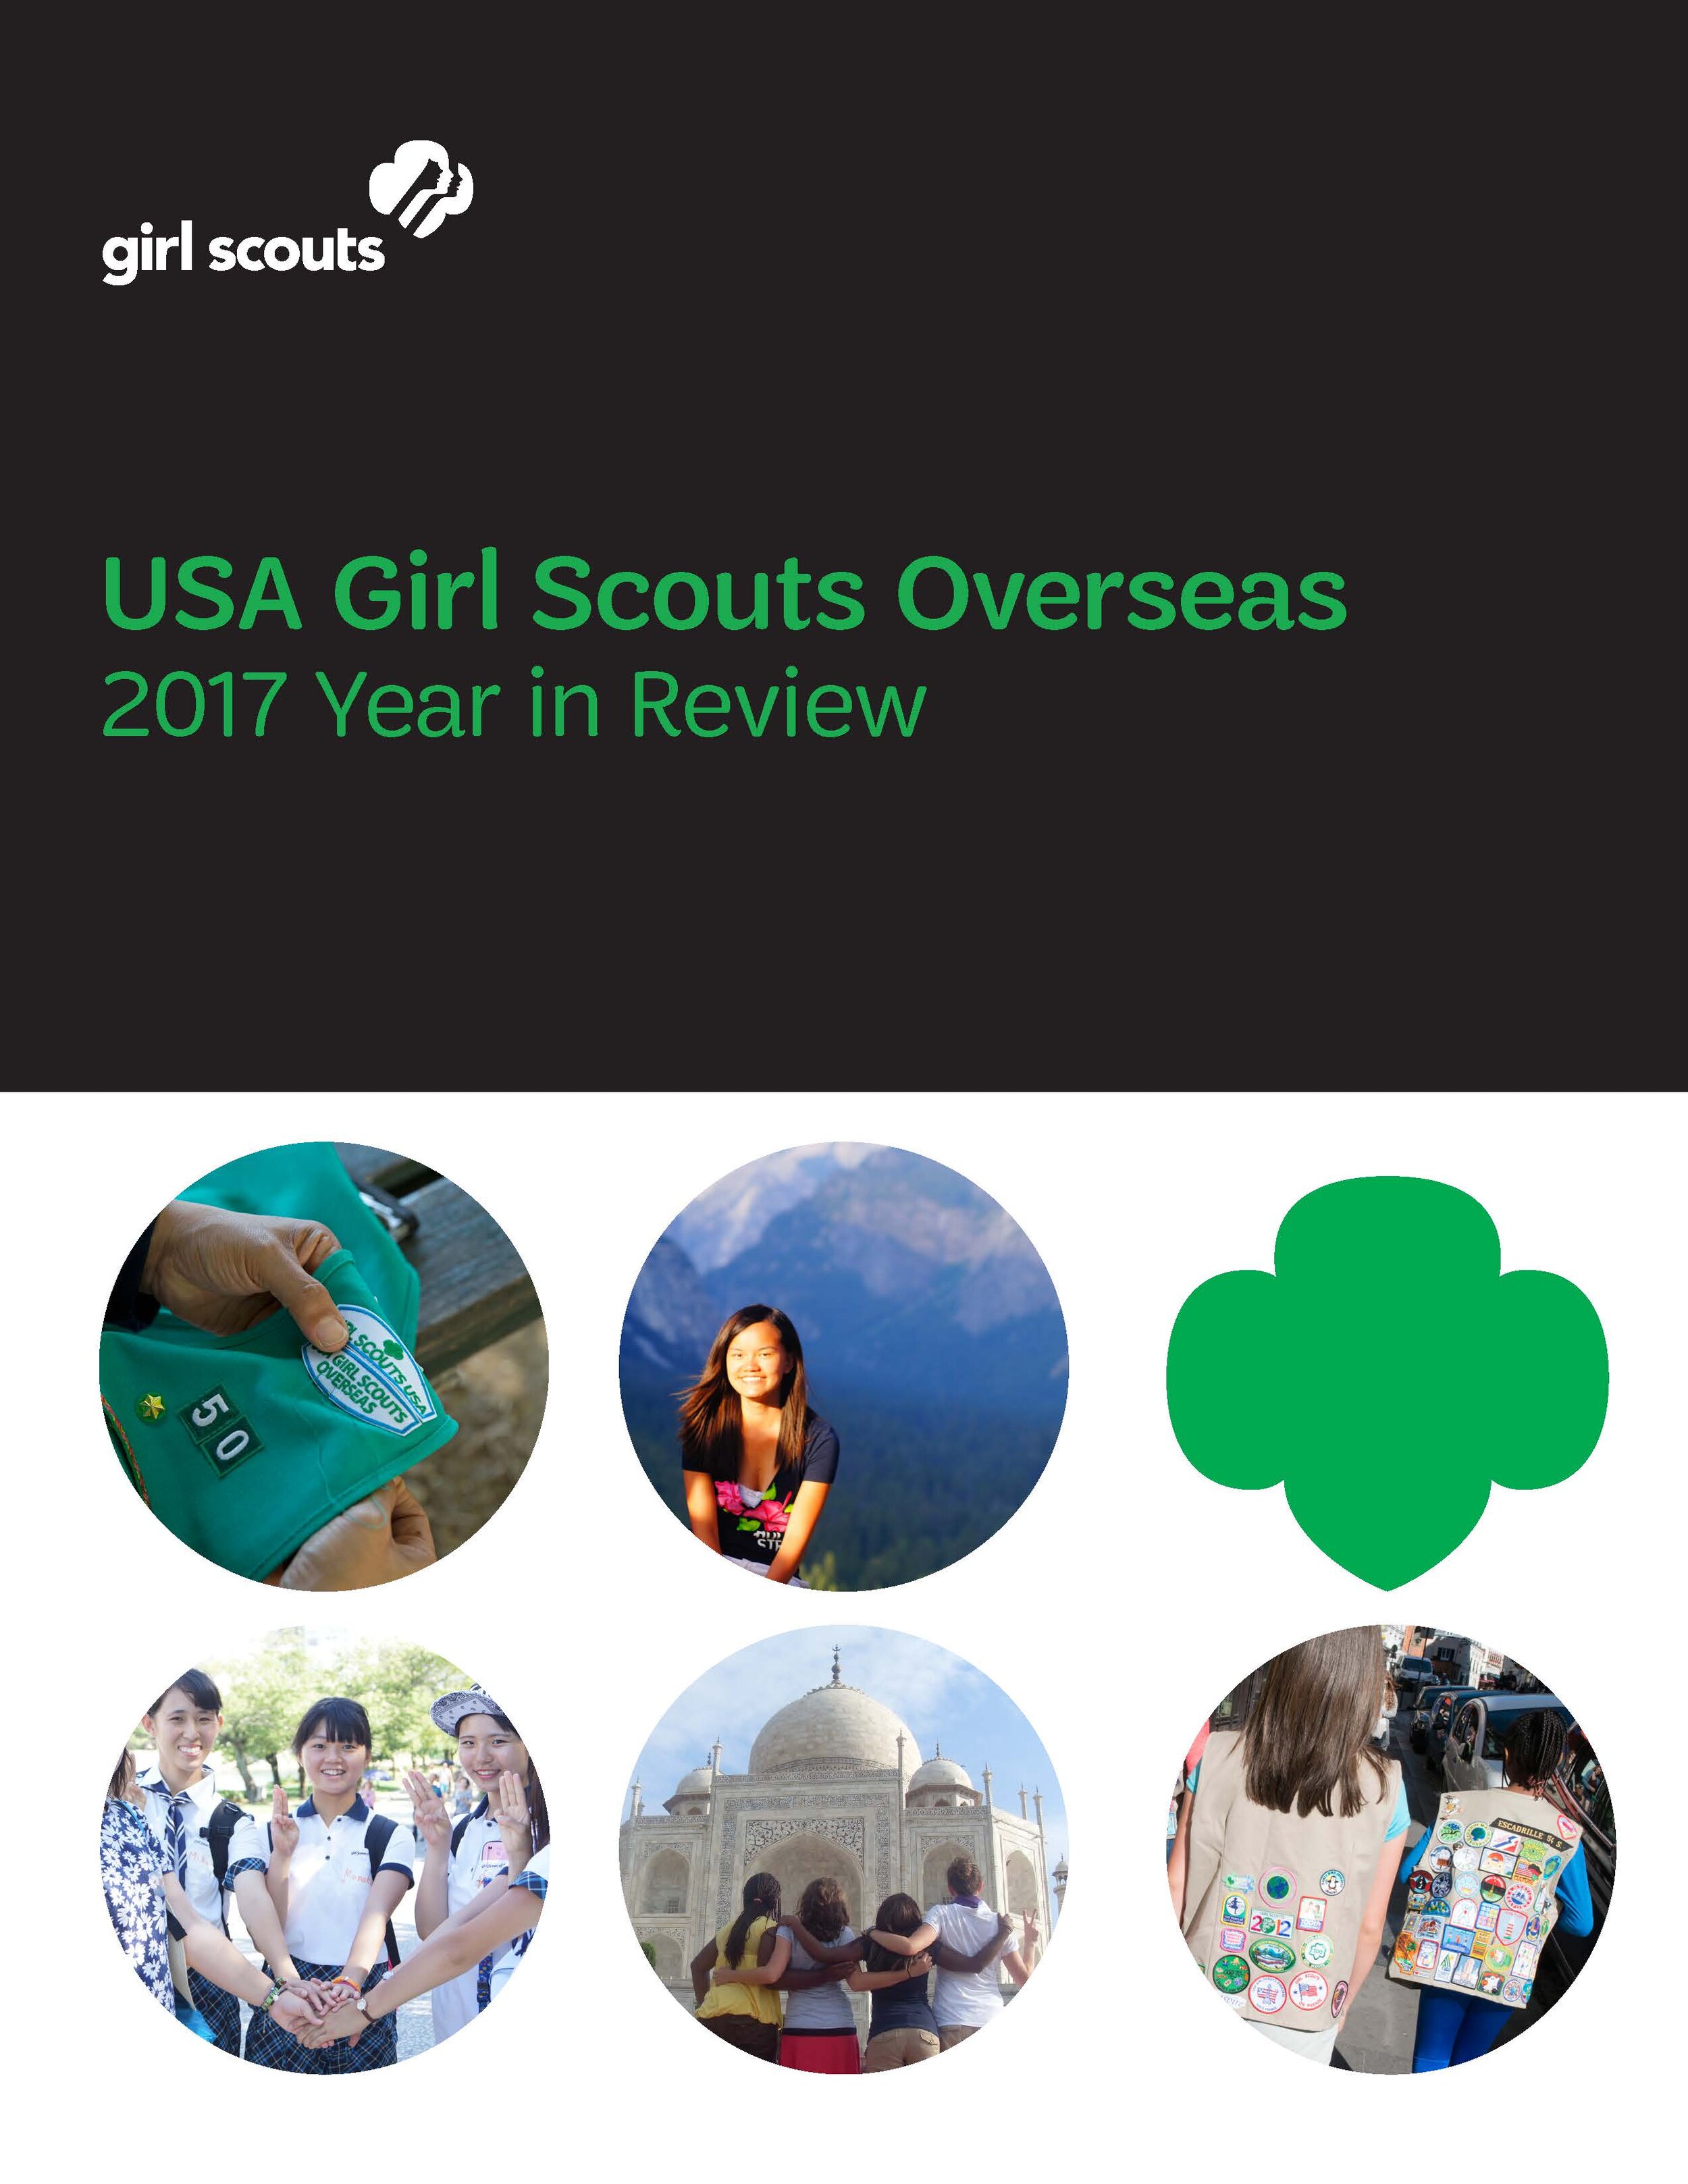 2017 USA Girl Scouts Overseas Annual Report 8.30 v4_Page_01.jpg